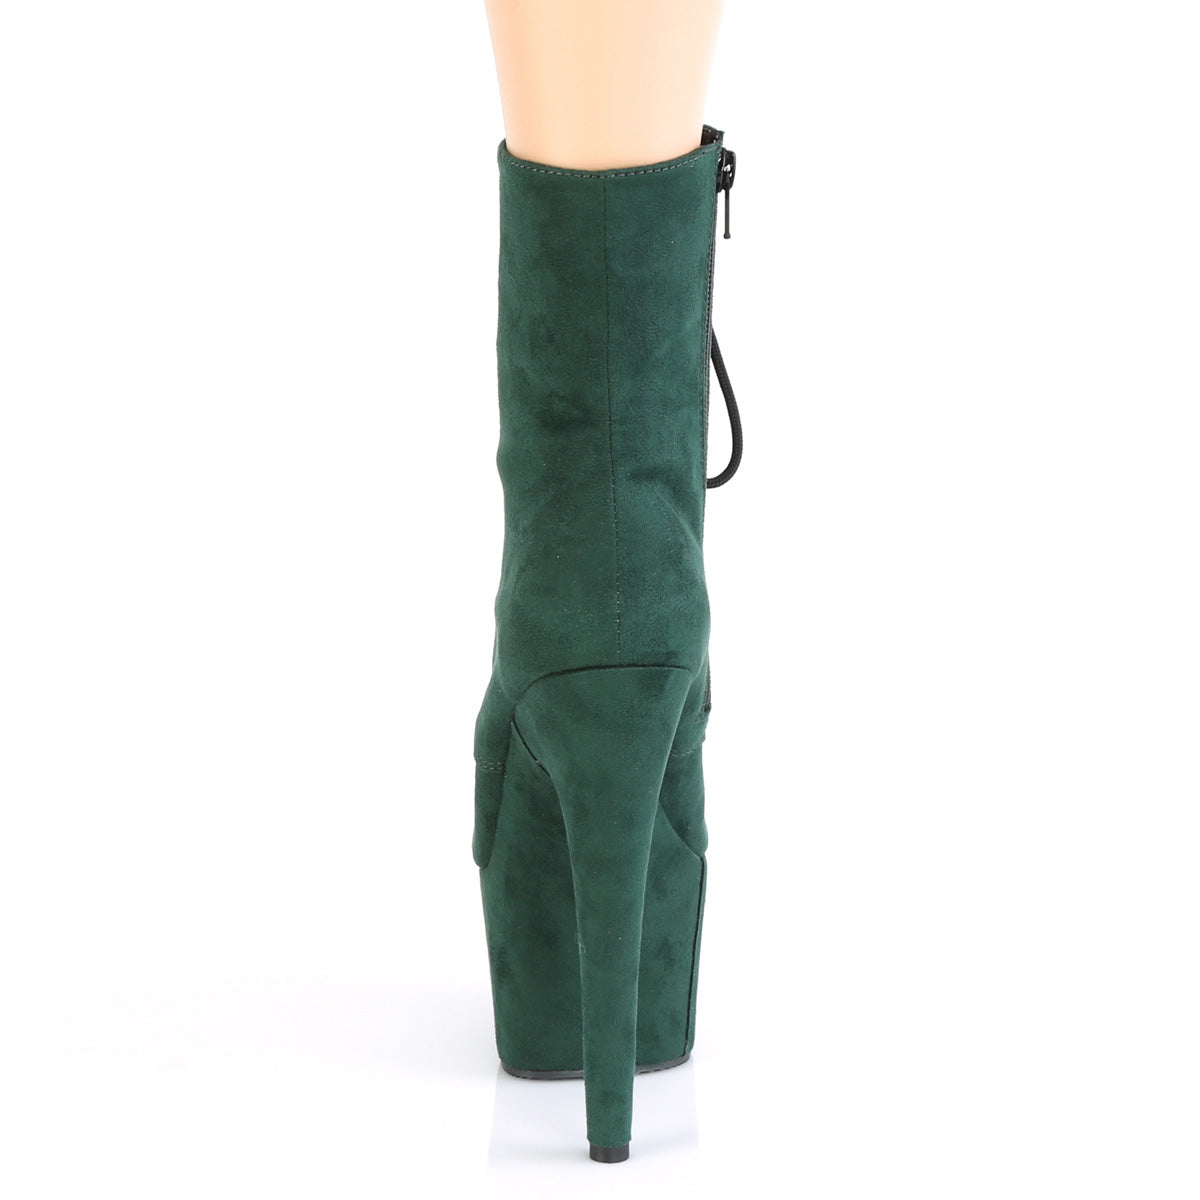 ADORE-1020FS 7" Heel Emerald Green Exotic Dancing Ankle Boot-Pleaser- Sexy Shoes Fetish Footwear